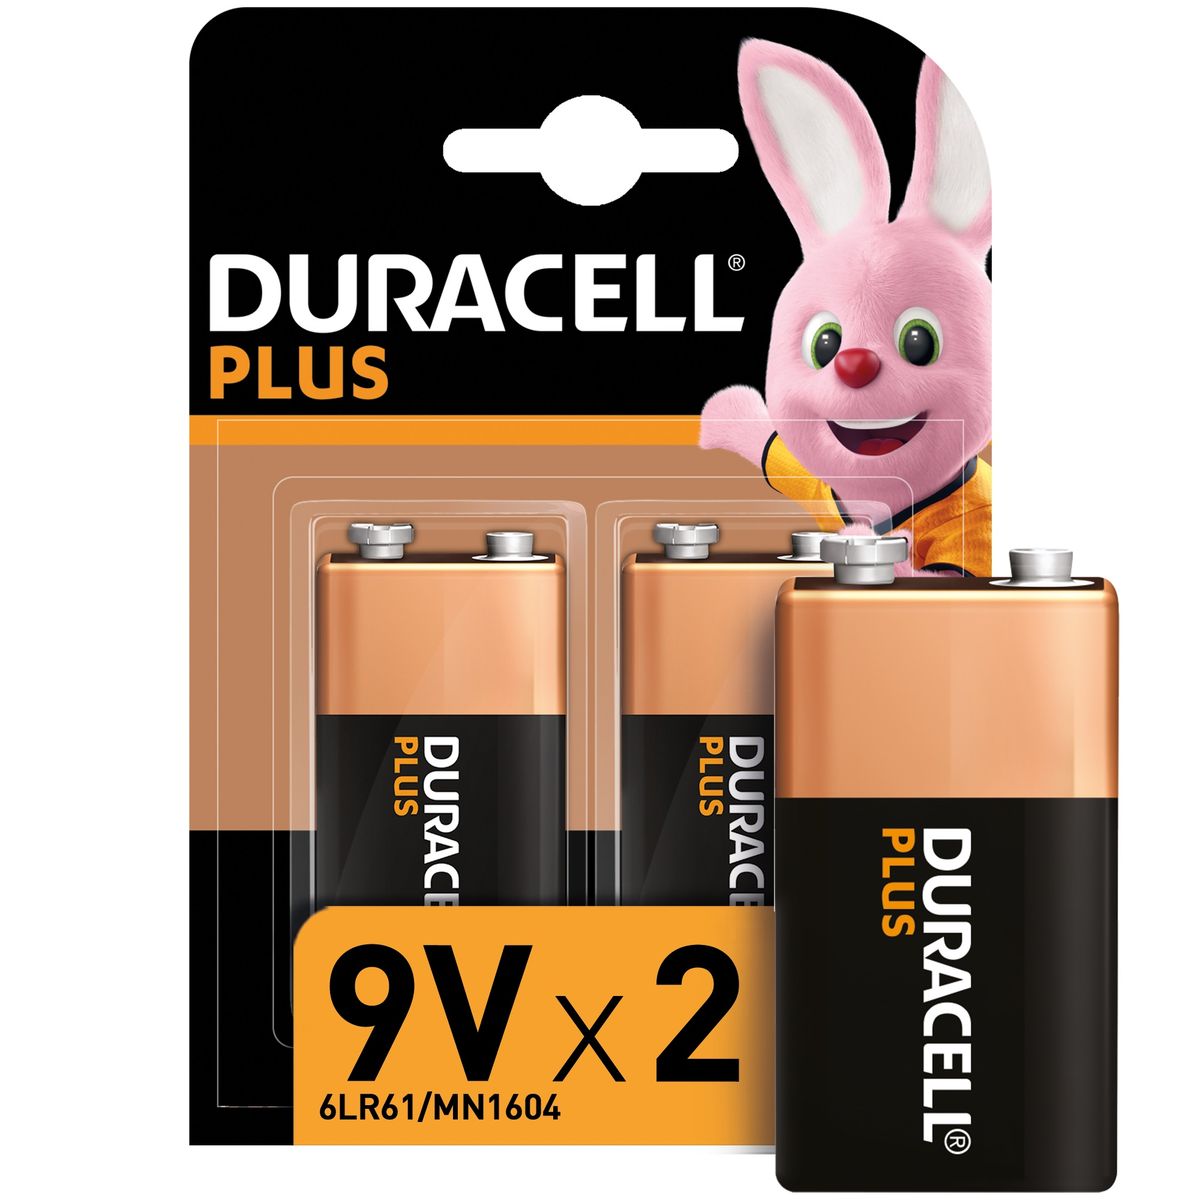 Duracell Plus 9V Alkaline Batteries, 6LR61 MN1604 - 2 Pack, Shop Today.  Get it Tomorrow!